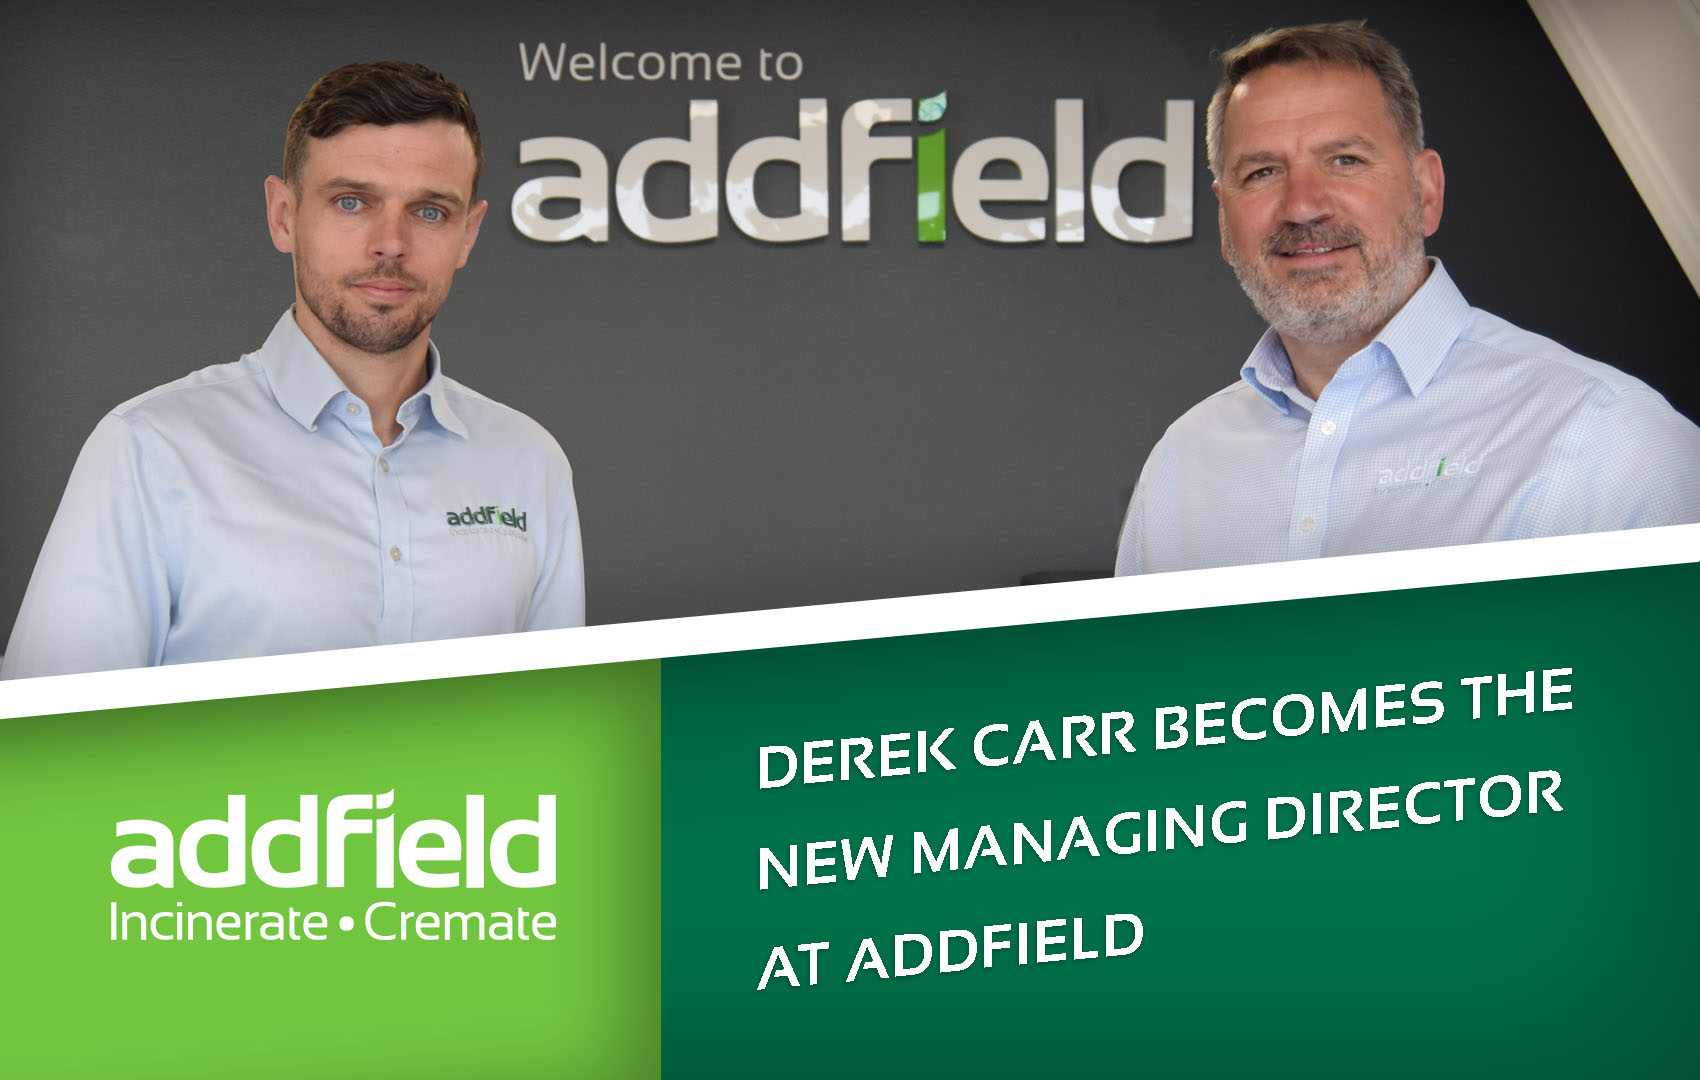 Derek Carr becomes the new managing director at Addfield